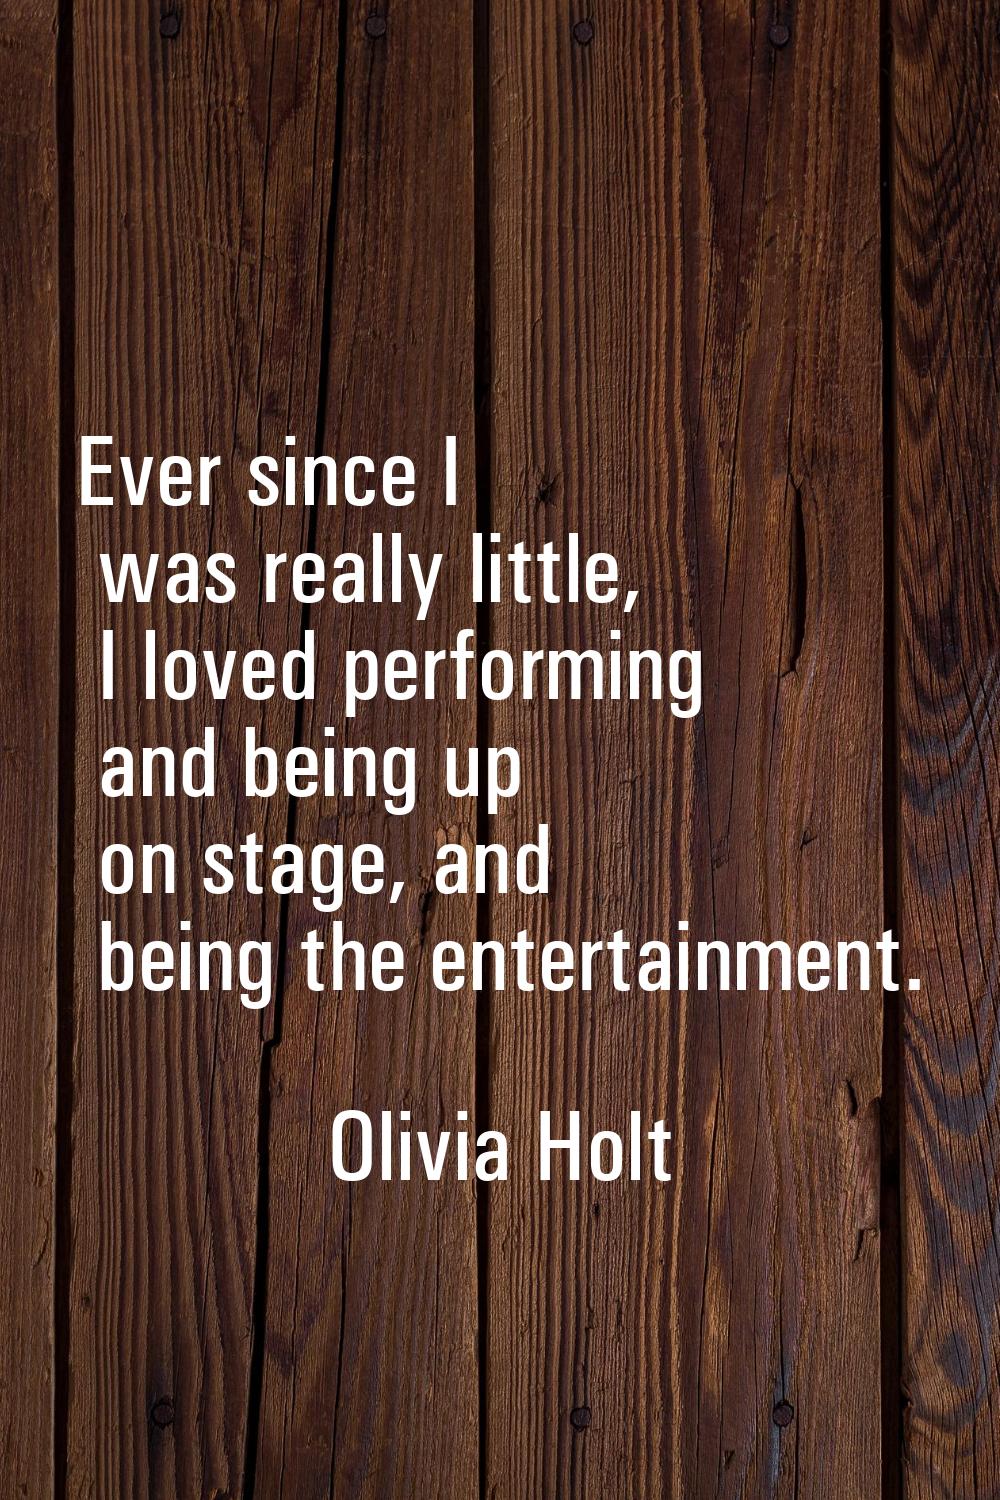 Ever since I was really little, I loved performing and being up on stage, and being the entertainme